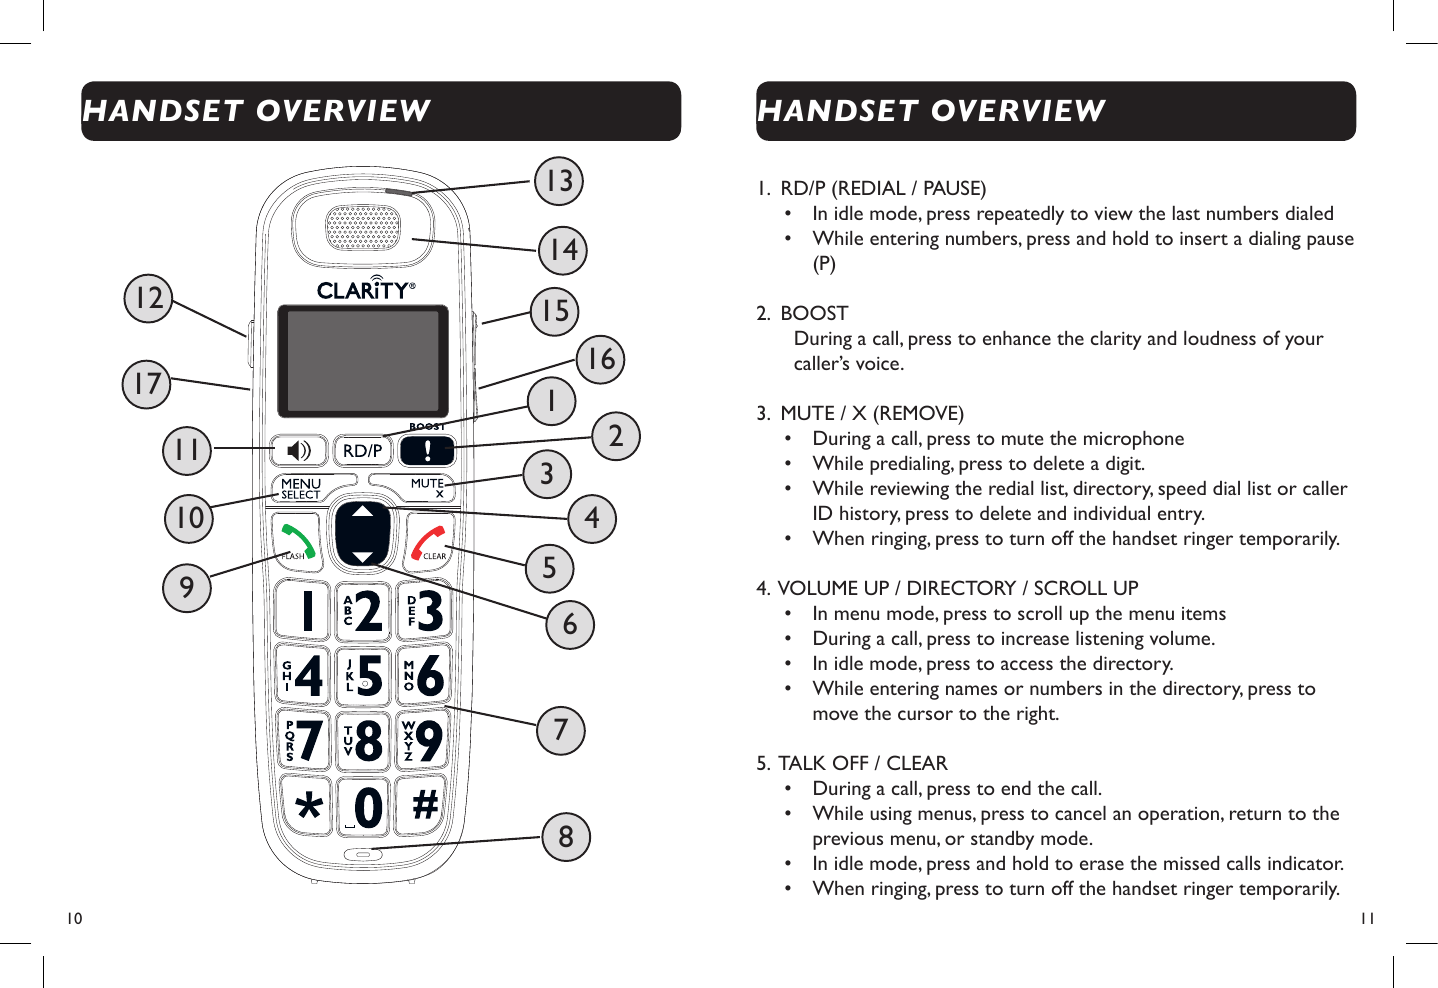 10  11HANDSET OVERVIEW1.  RD/P (REDIAL / PAUSE)•  In idle mode, press repeatedly to view the last numbers dialed •  While entering numbers, press and hold to insert a dialing pause (P)2.  BOOSTDuring a call, press to enhance the clarity and loudness of your caller’s voice.3.  MUTE / X (REMOVE)•  During a call, press to mute the microphone•  While predialing, press to delete a digit.•  While reviewing the redial list, directory, speed dial list or caller ID history, press to delete and individual entry.•  When ringing, press to turn off the handset ringer temporarily.4.  VOLUME UP / DIRECTORY / SCROLL UP•  In menu mode, press to scroll up the menu items•  During a call, press to increase listening volume.•  In idle mode, press to access the directory.•  While entering names or numbers in the directory, press to move the cursor to the right.5.  TALK OFF / CLEAR•  During a call, press to end the call.•  While using menus, press to cancel an operation, return to the previous menu, or standby mode.•  In idle mode, press and hold to erase the missed calls indicator.•  When ringing, press to turn off the handset ringer temporarily.HANDSET OVERVIEW 2 4 6 8 10 11 9 7 5 3 1 12  15 17  16 14 13